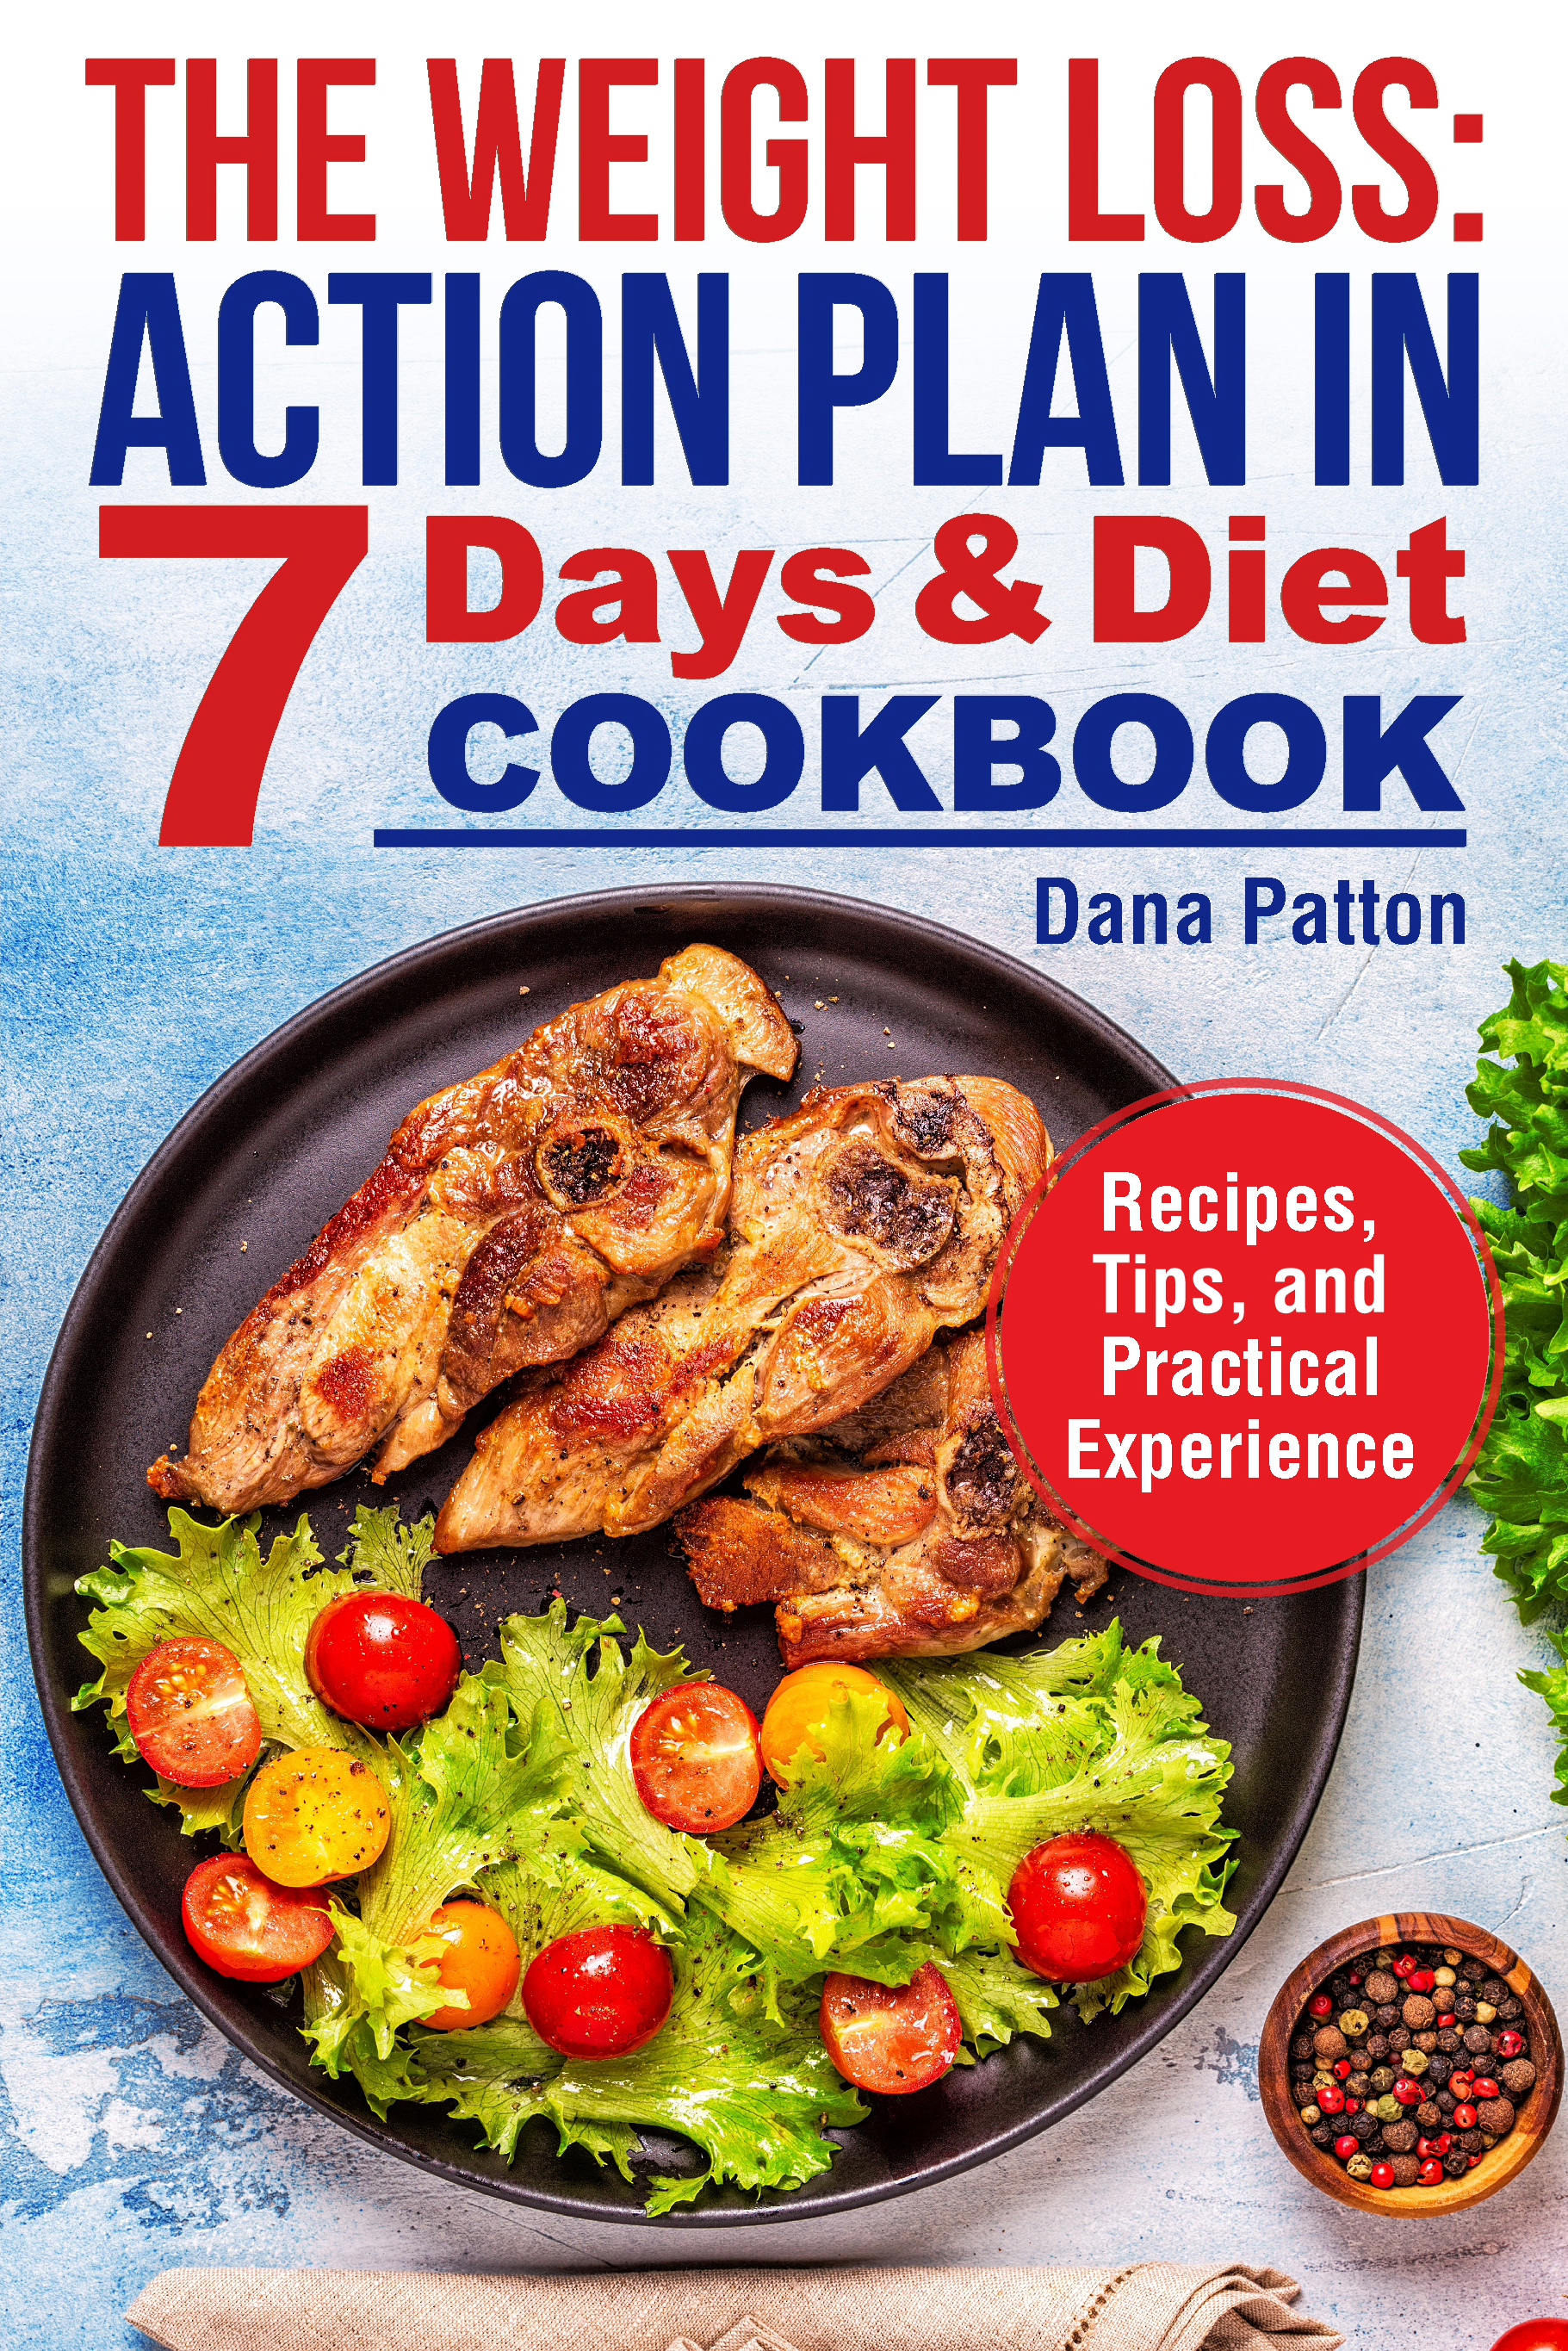 FREE: The Weight Loss: Action Plan in 7 Days and Diet Cookbook (Recipes, Tips, and Practical Experience) by Dana Patton